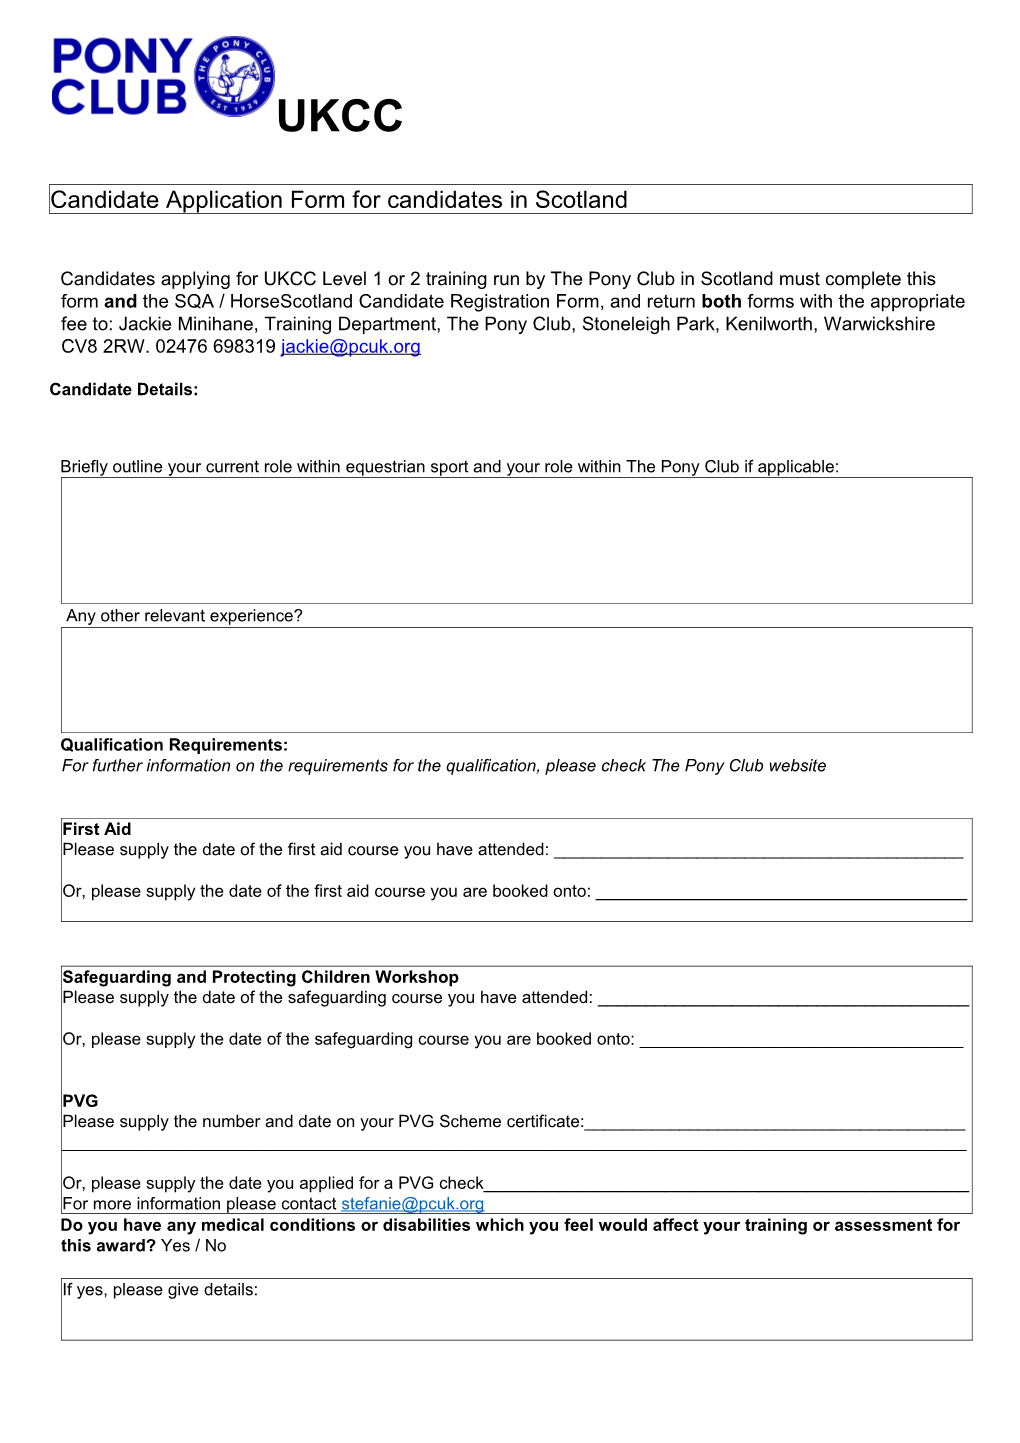 The Pony Club UKCC APL Candidate Application Form